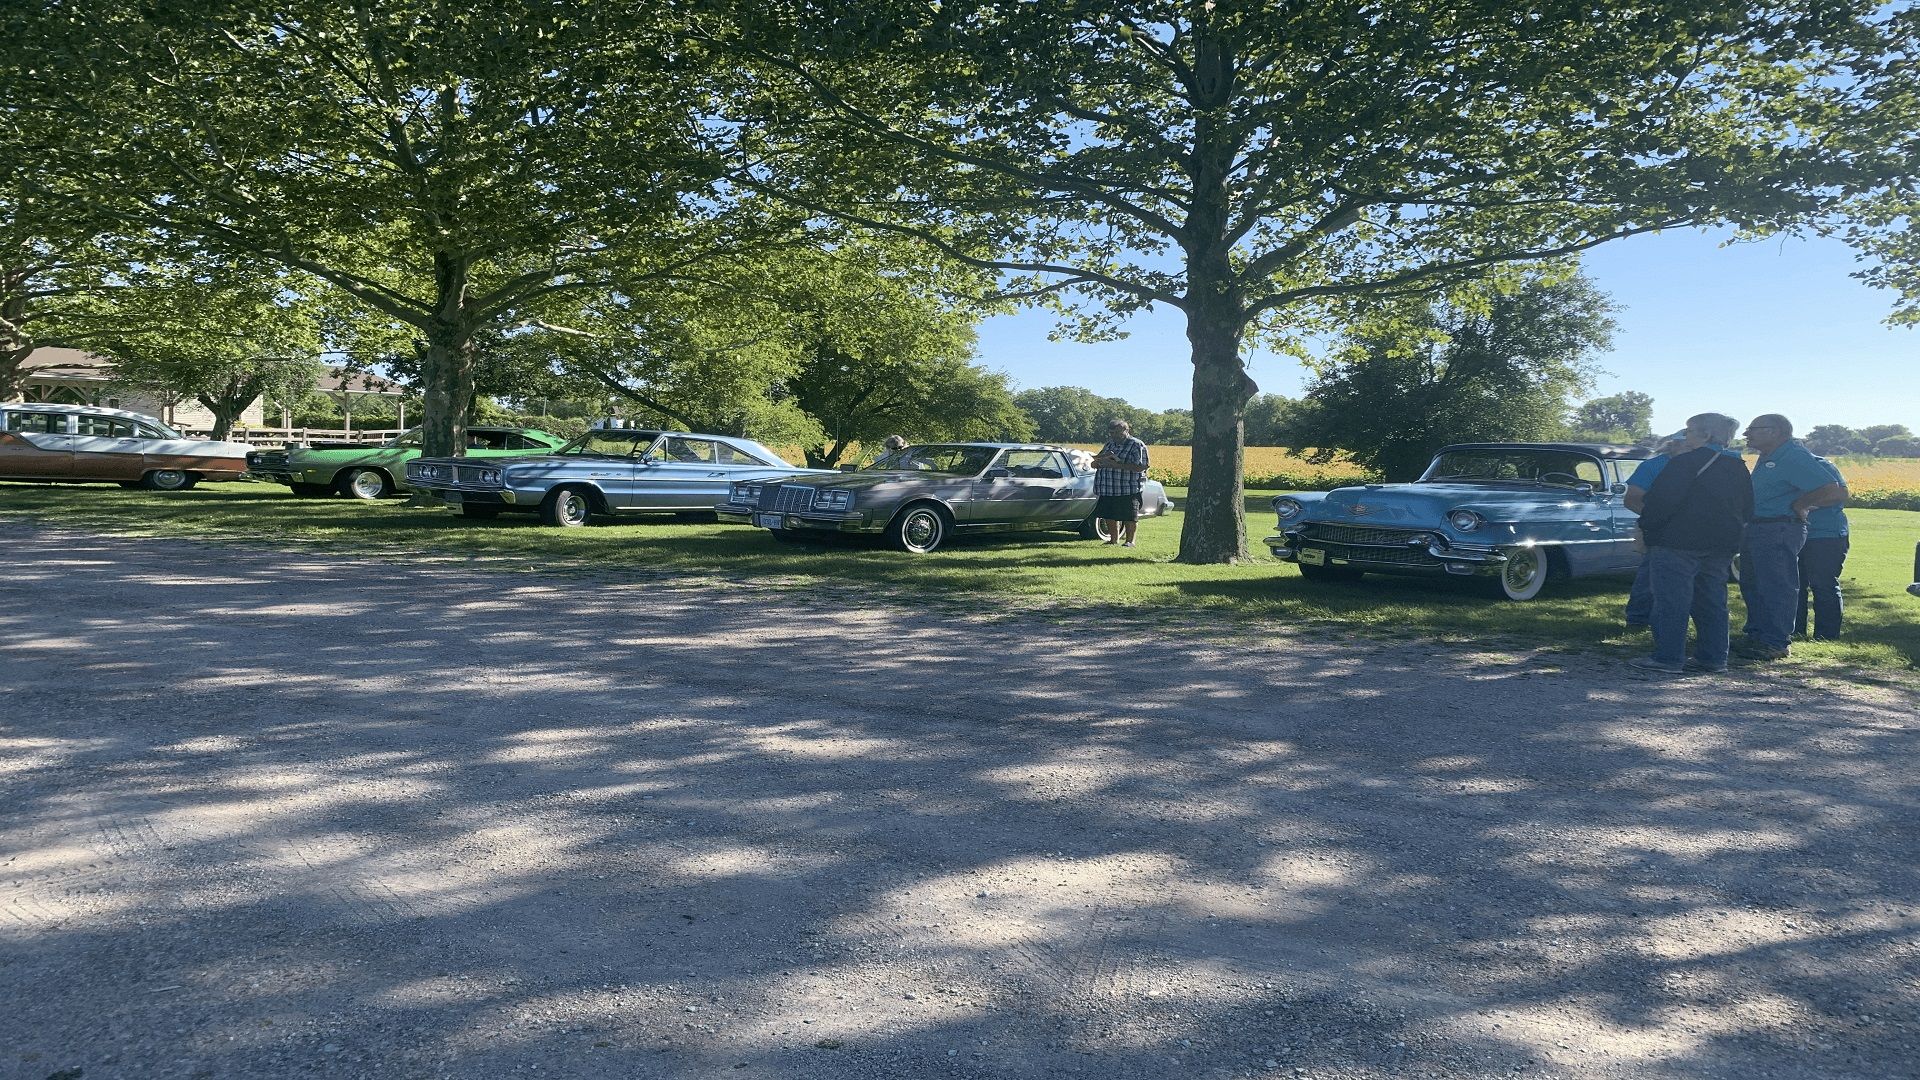 Great pictures of the Lakeside Car show